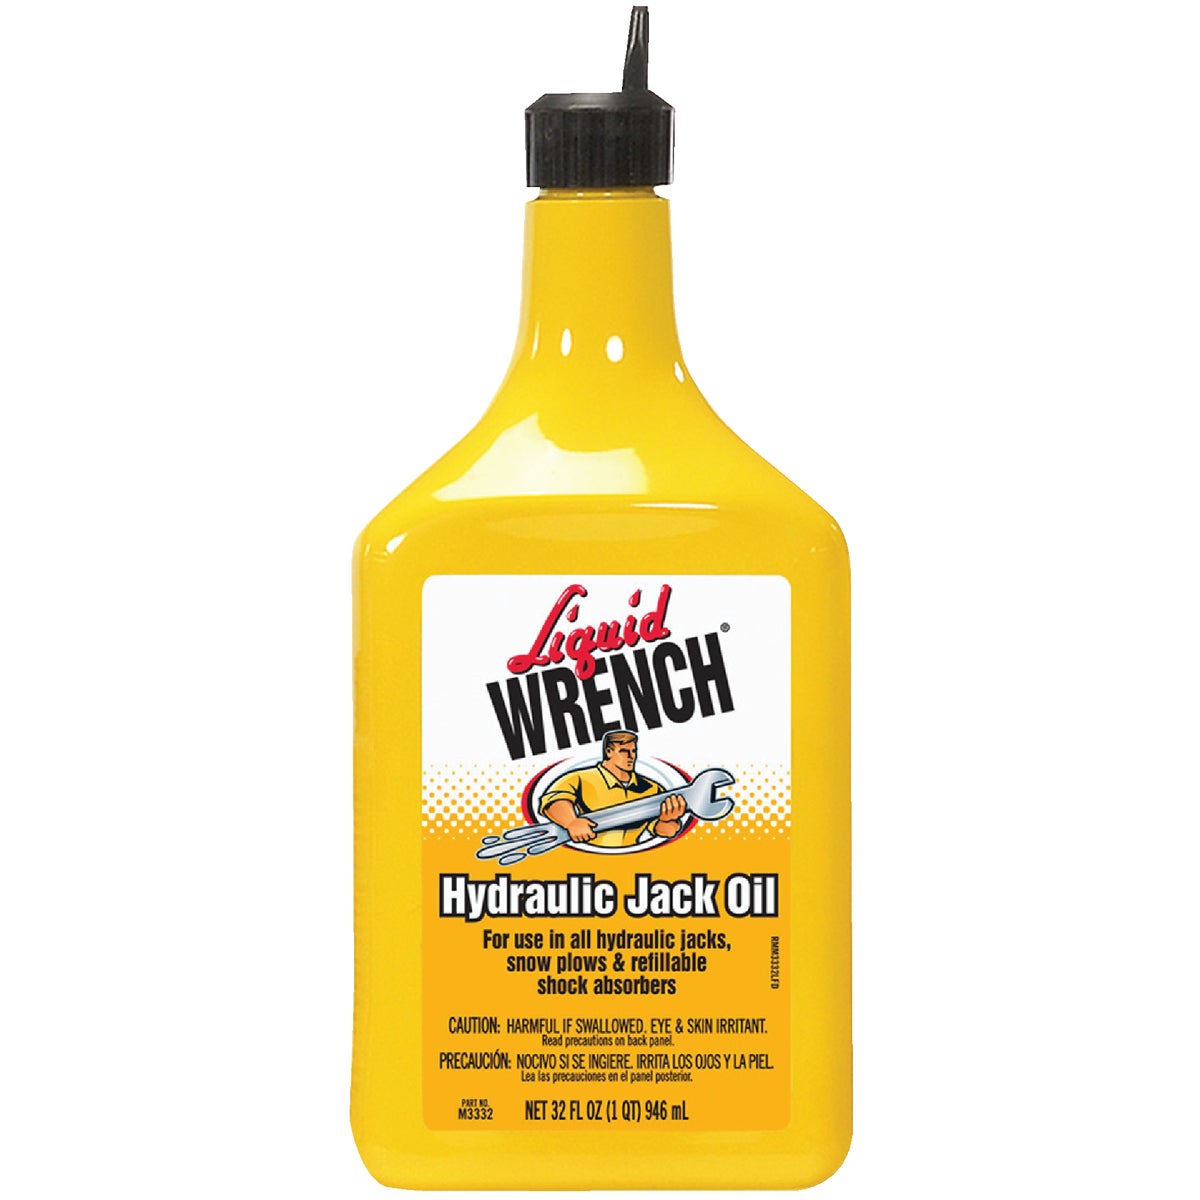 Item 570625, Prevents rust, stops sludge build-ups and improves lubrication.